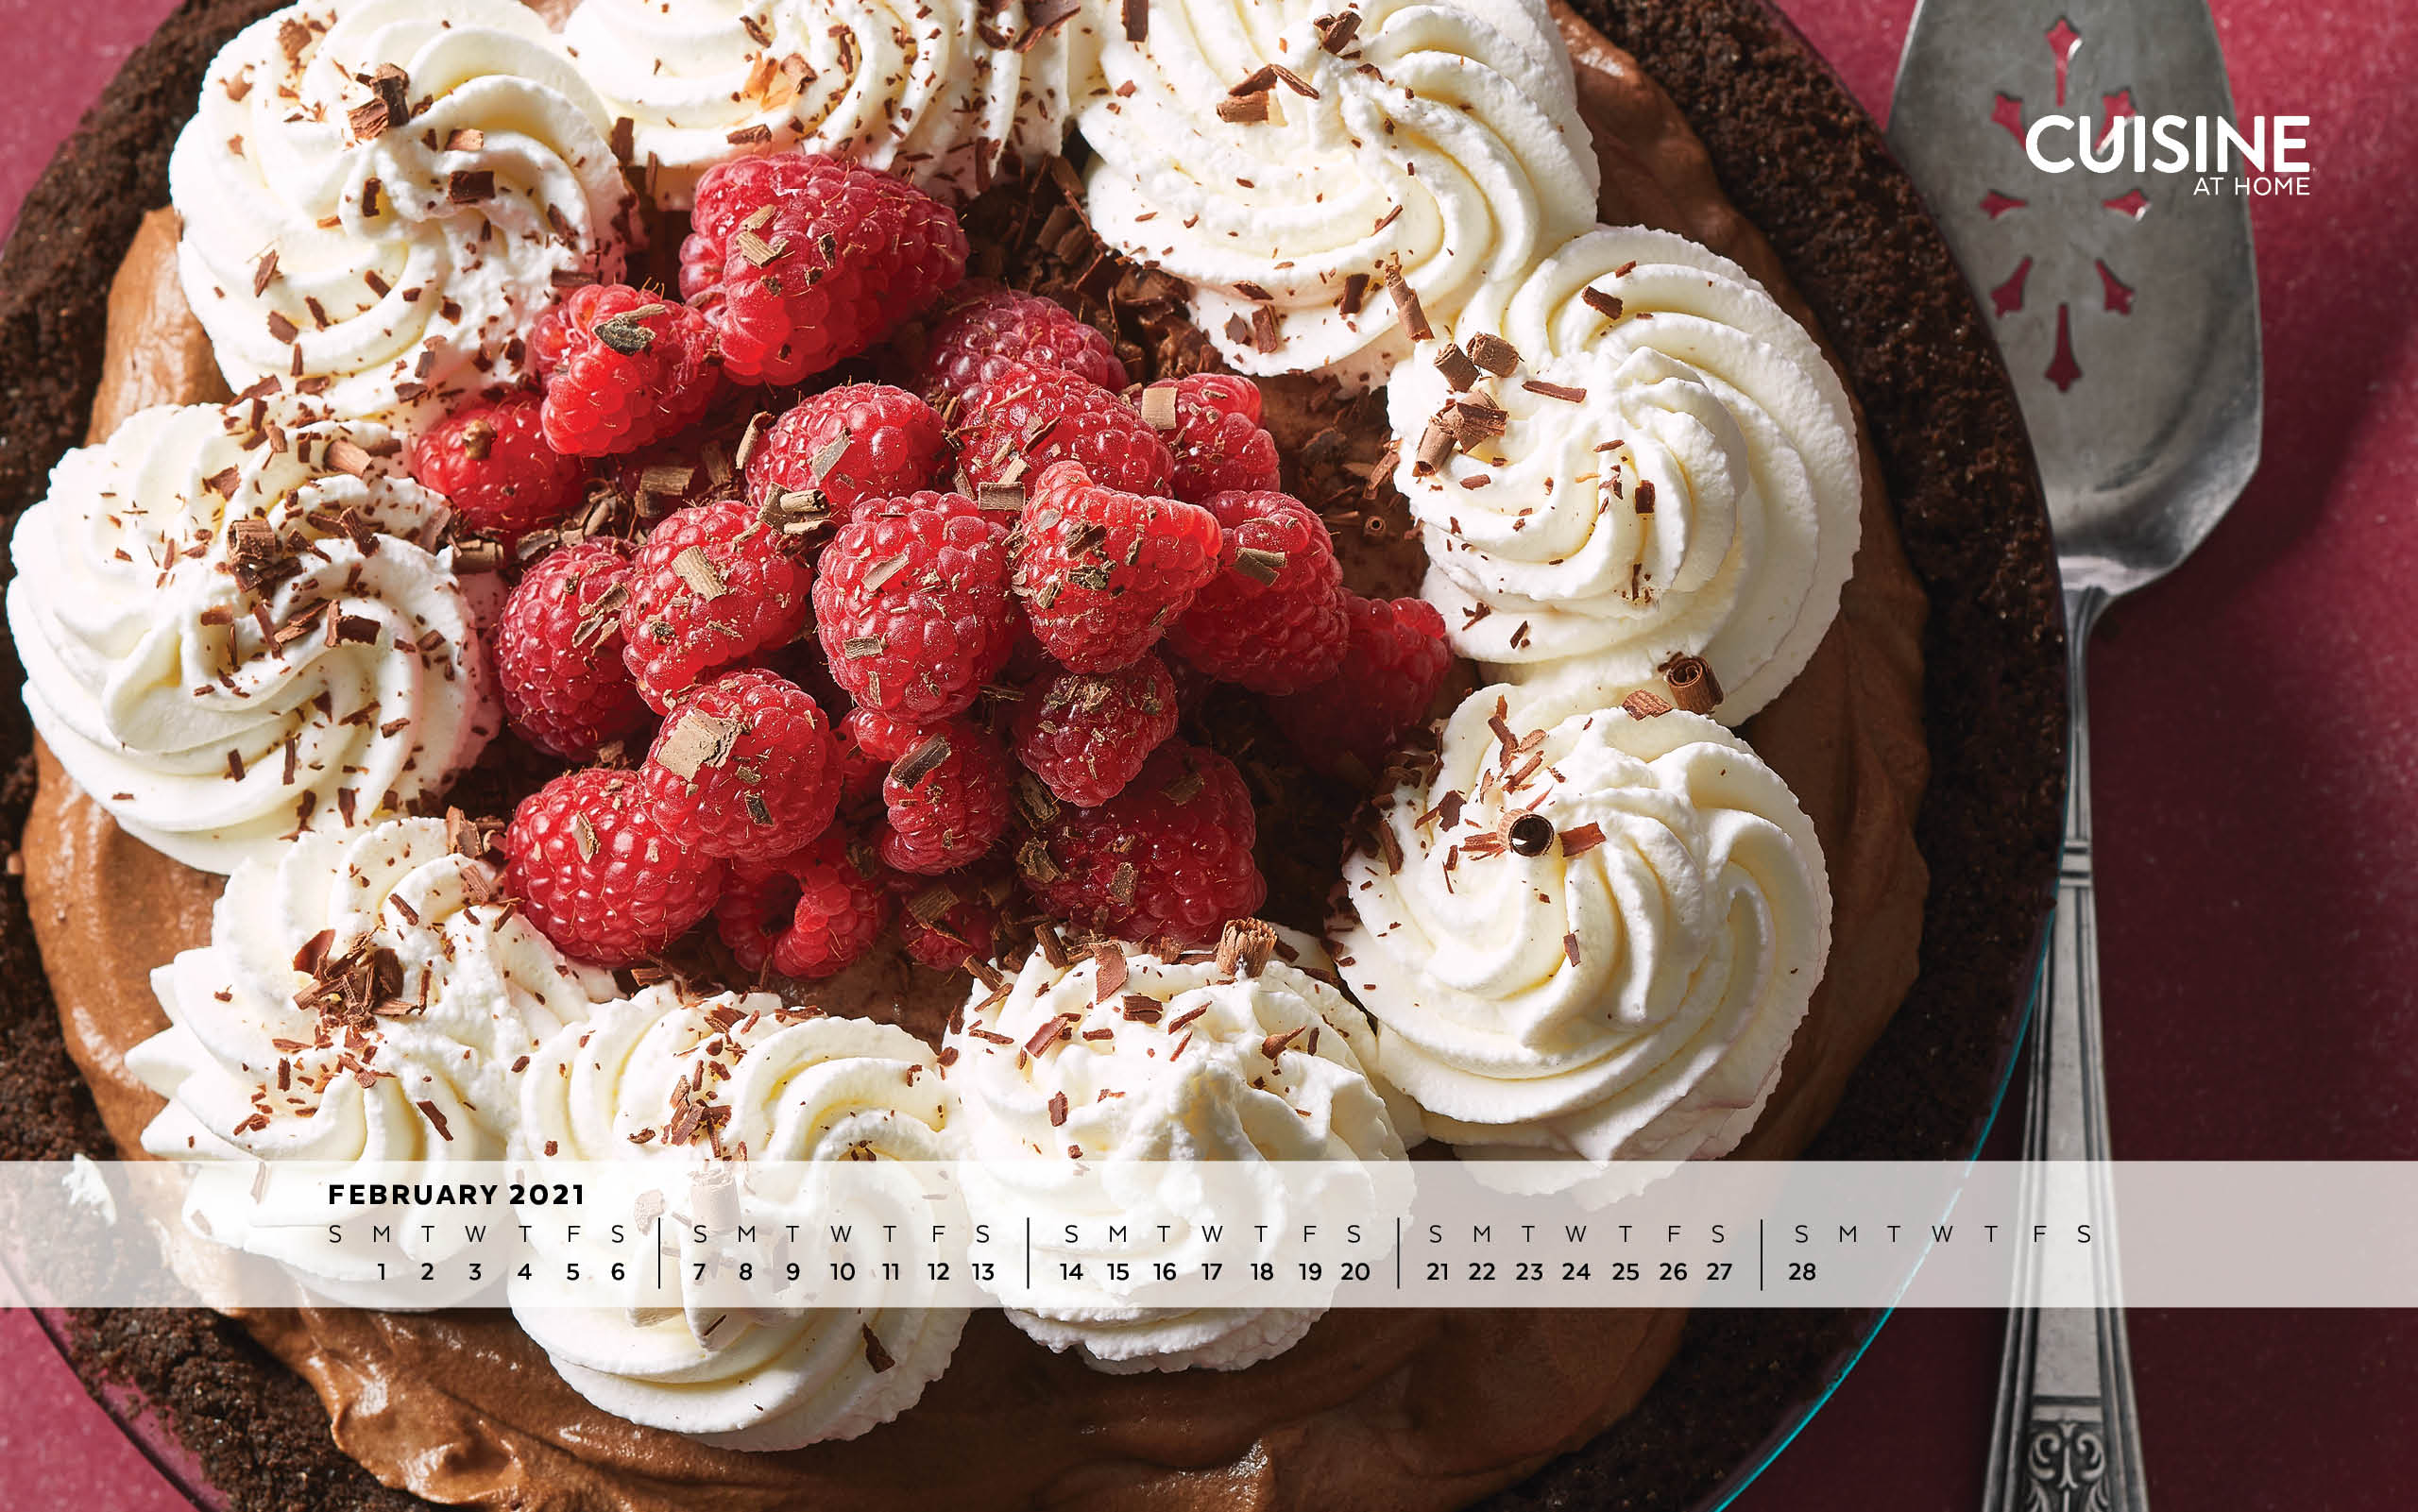 February Valentine's Day chocolate cream pie desktop wallpaper aesthetic with calendar from Cuisine at Home